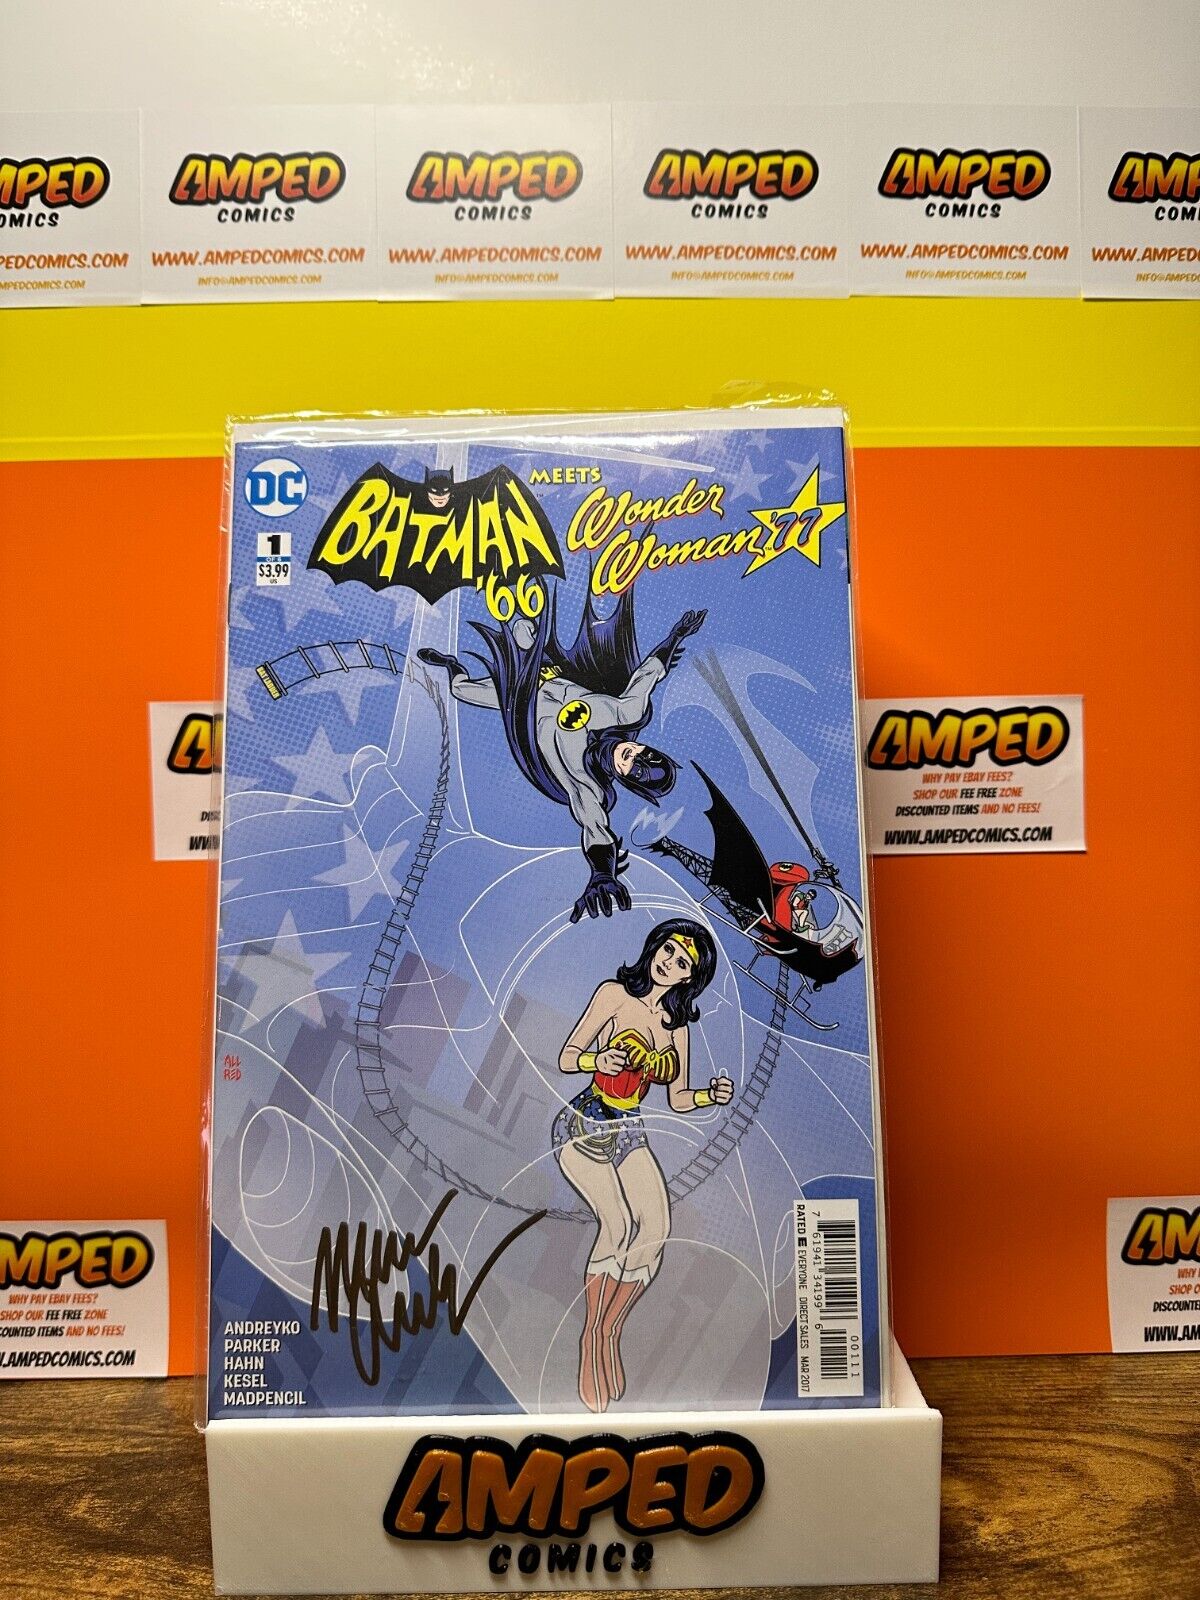 BATMAN 66 meets WONDER WOMAN 77 #1-6 COMPLETE SET (2017) #1 SIGNED BY ANDREYKO